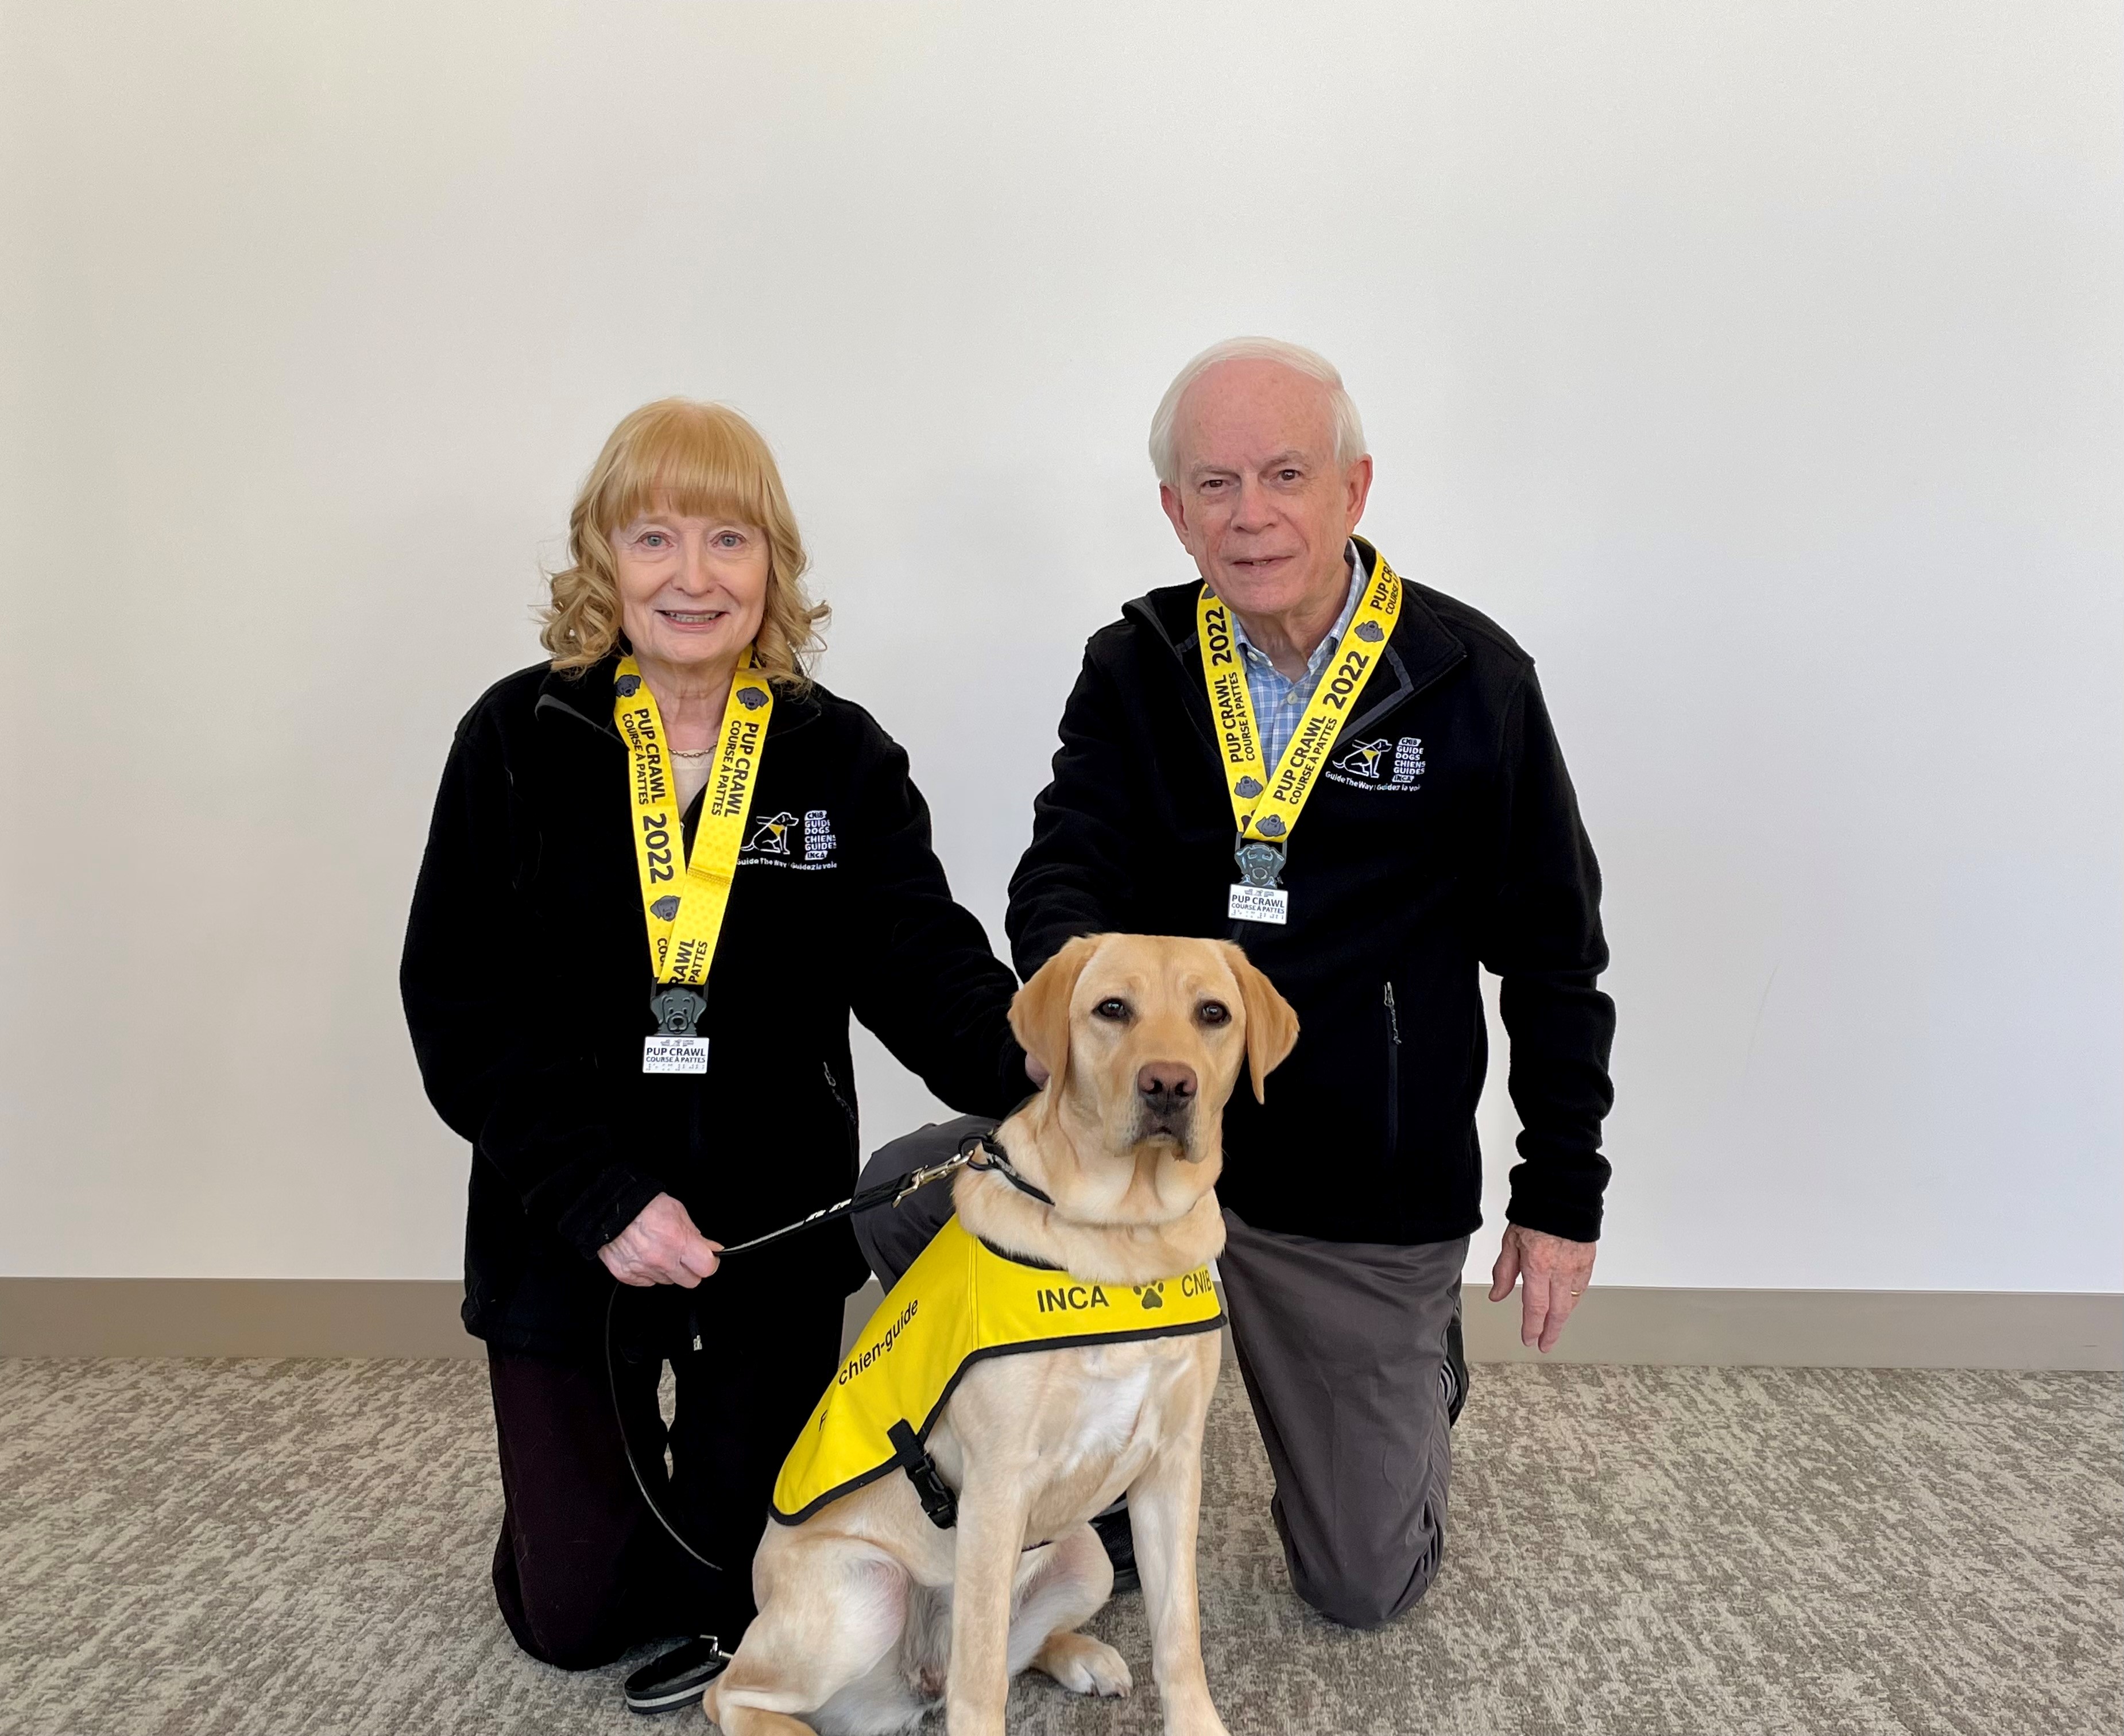 Mary and John Crocker pose with CNIB Guide Dog puppy, Amber, a female yellow Labrador retriever they named following last year's Pup Crawl.